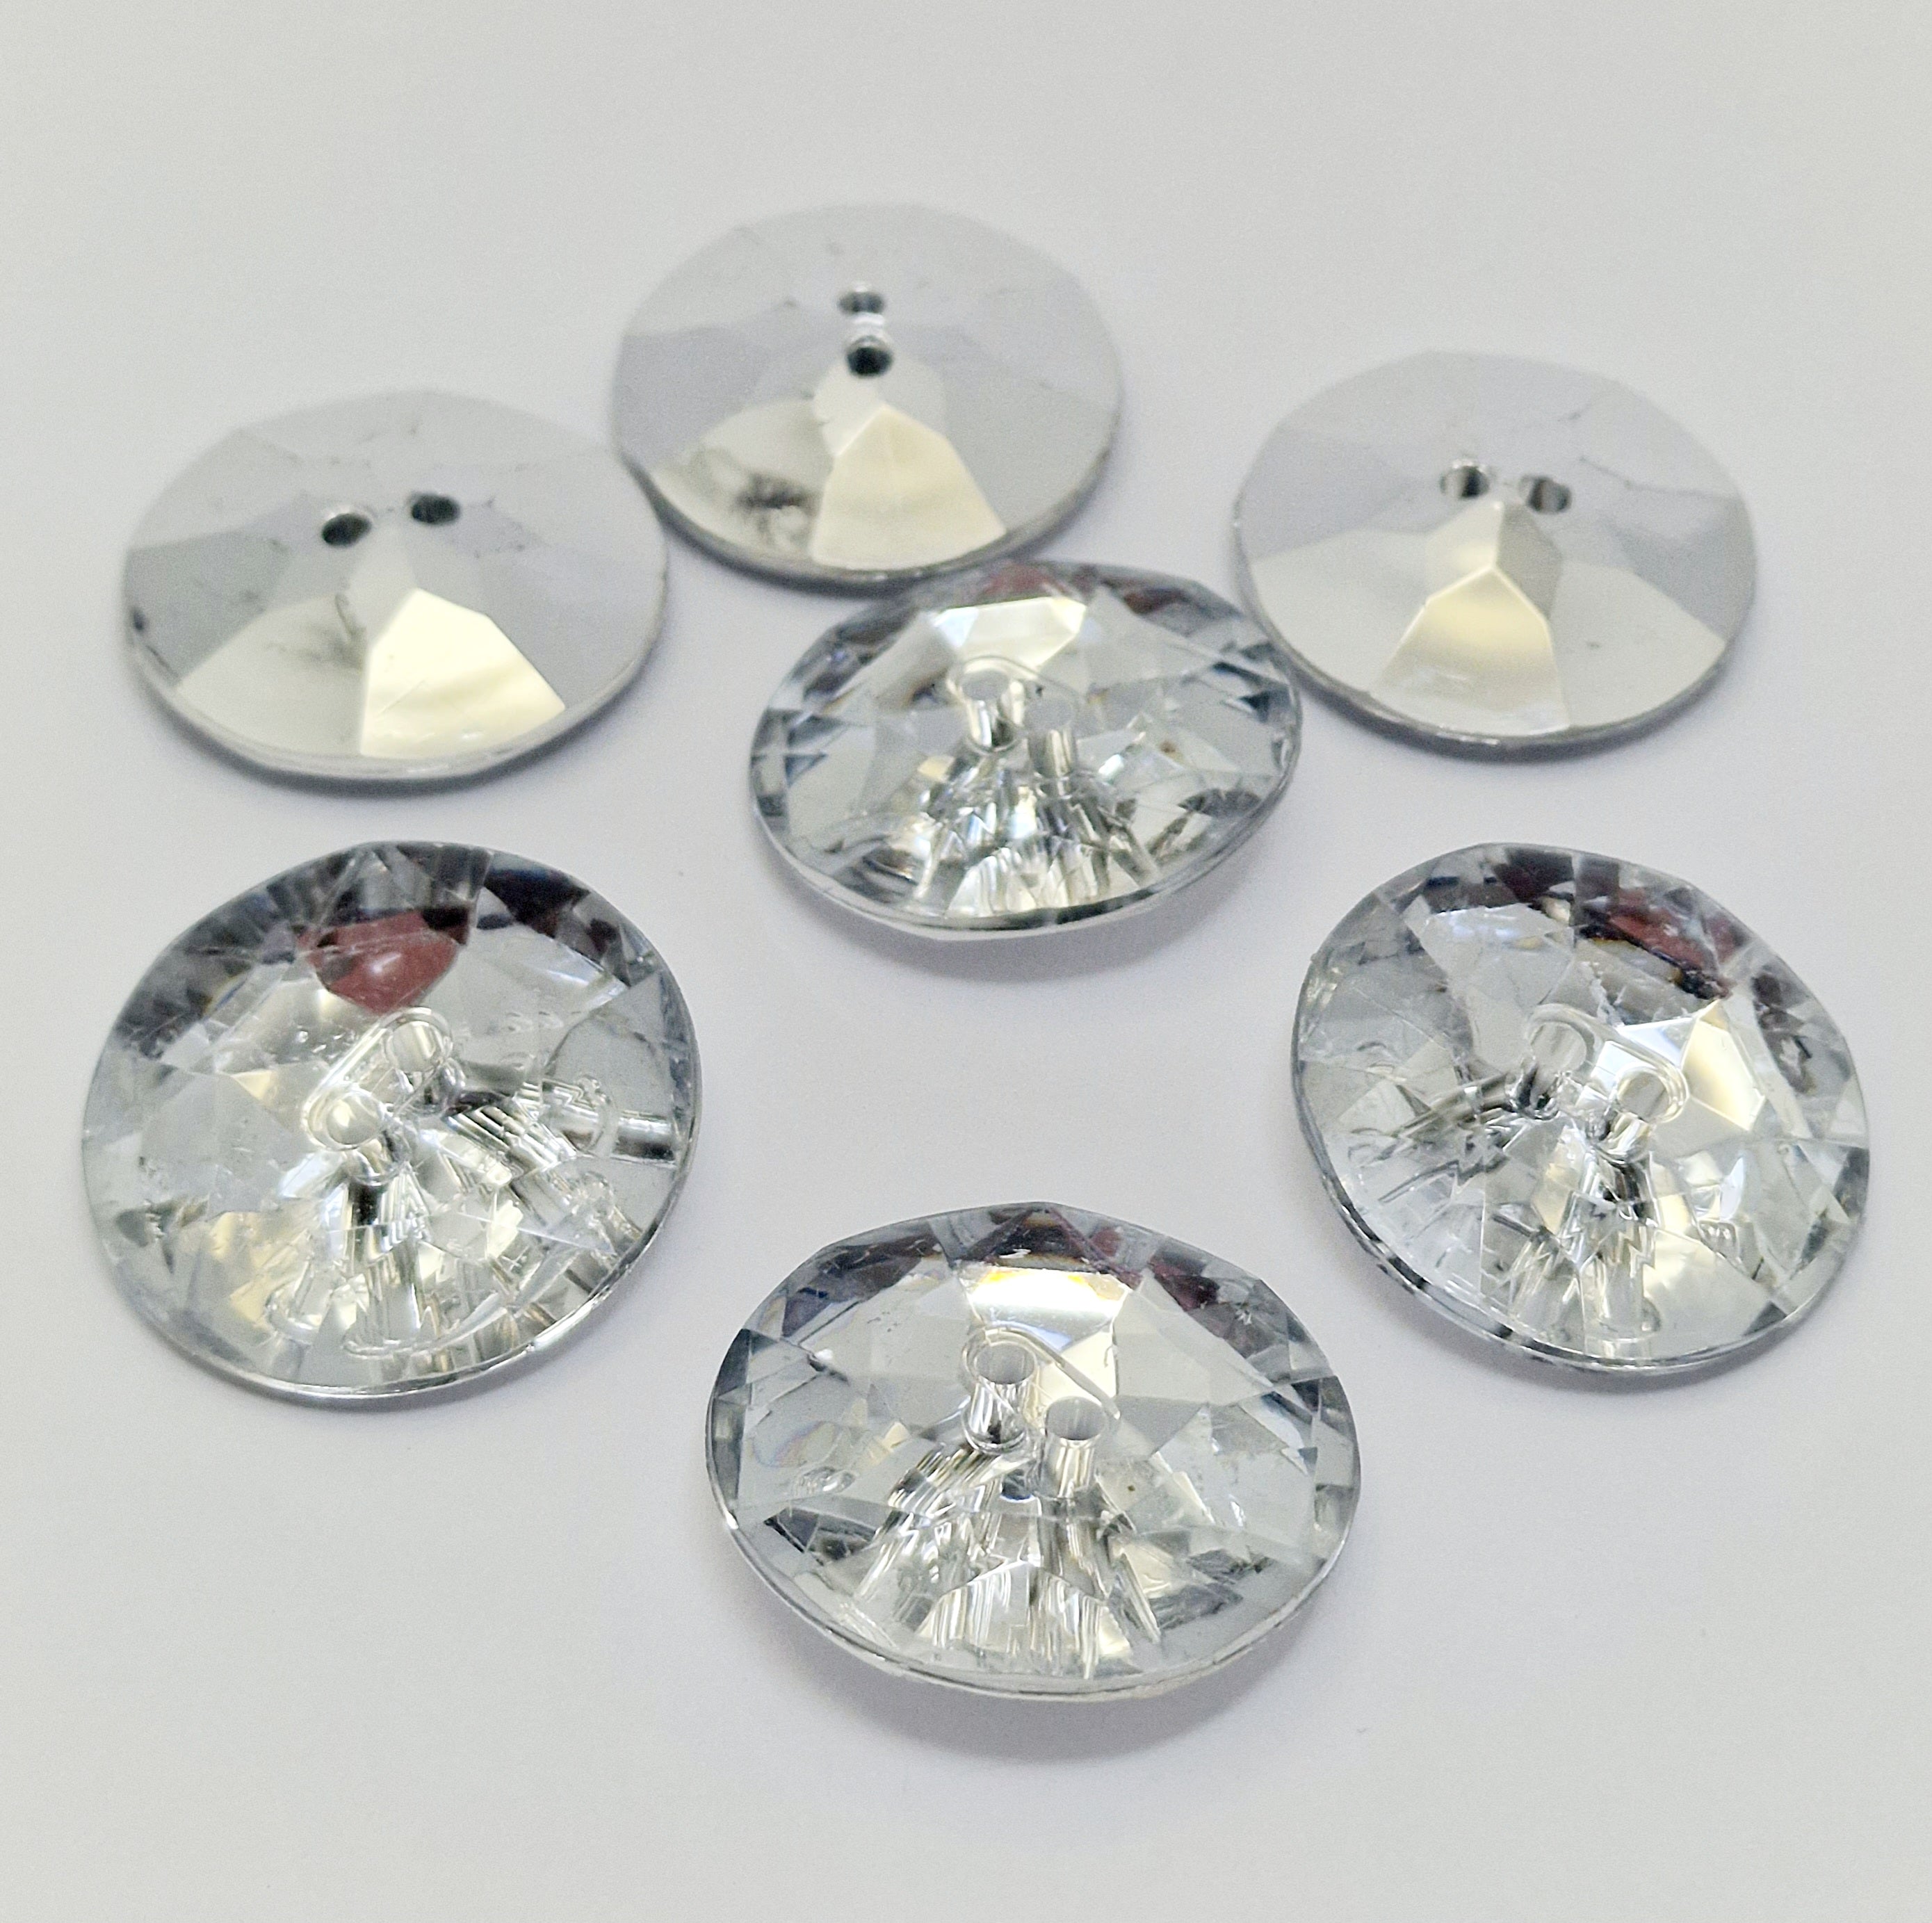 MajorCrafts 8pcs 30mm Crystal Clear 2 Holes Acrylic Large Round Sewing Buttons